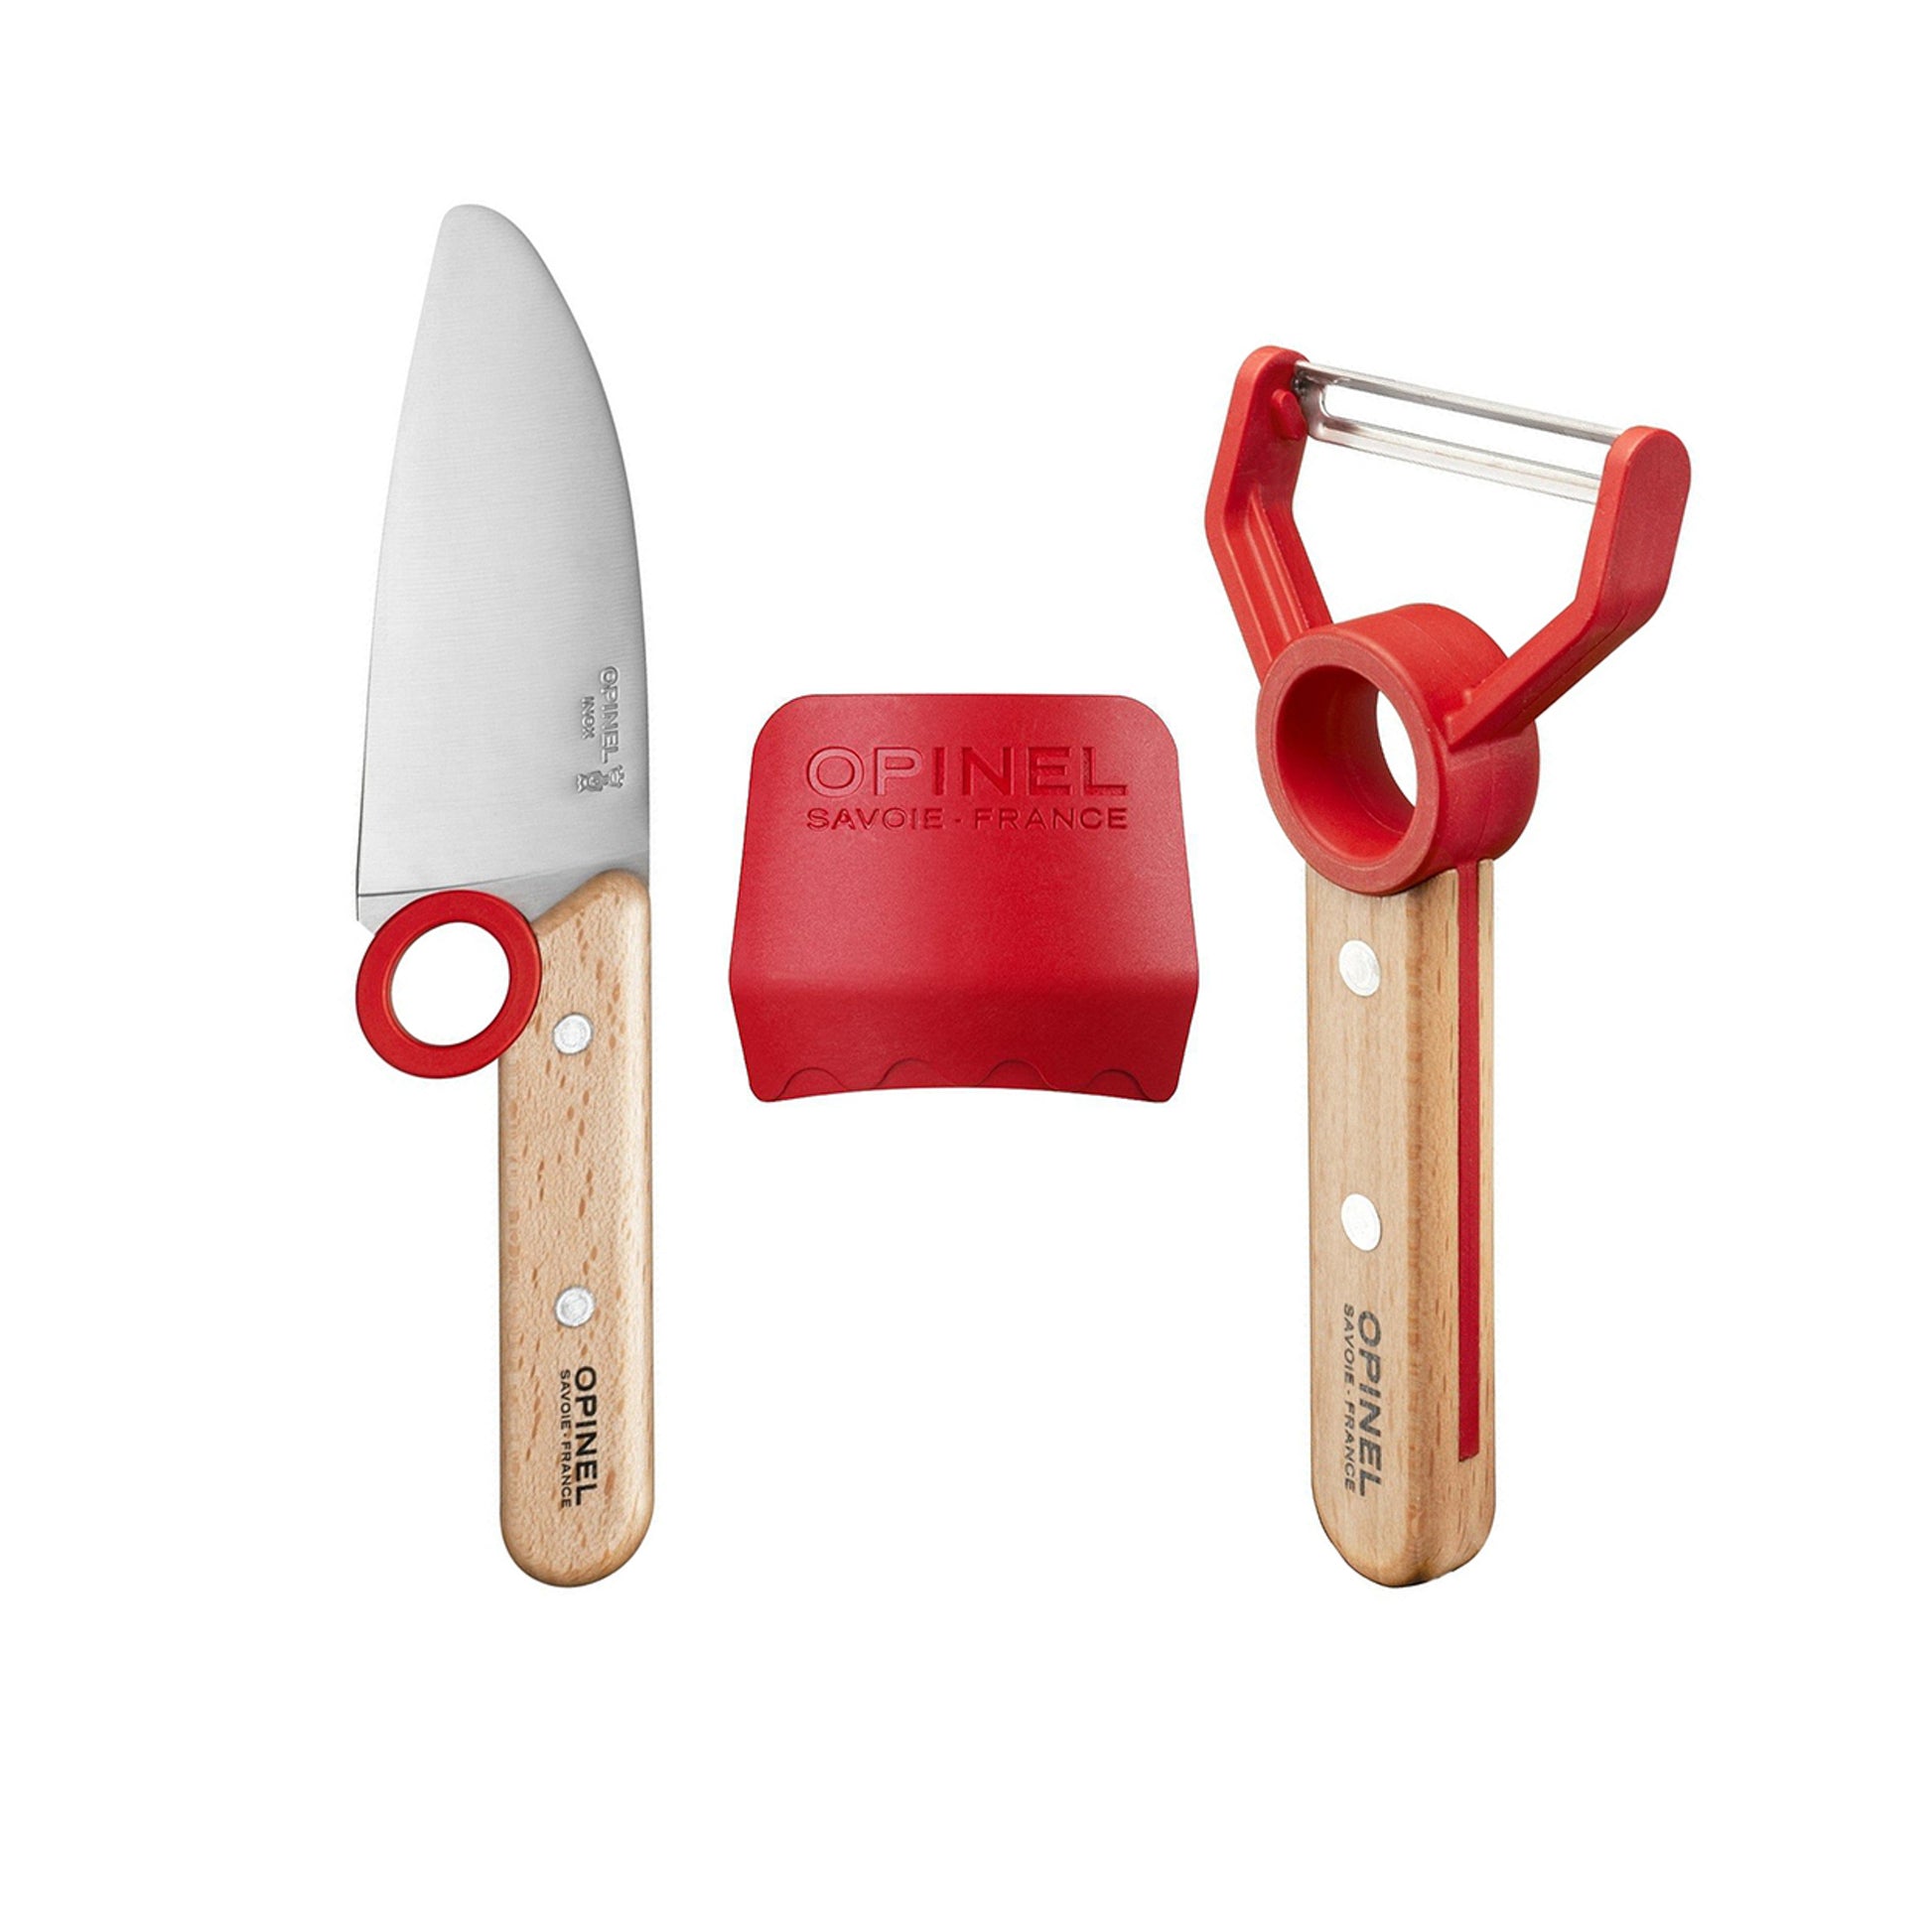 Opinel Le Petit Chef Children's Y Peeler with Finger Guard